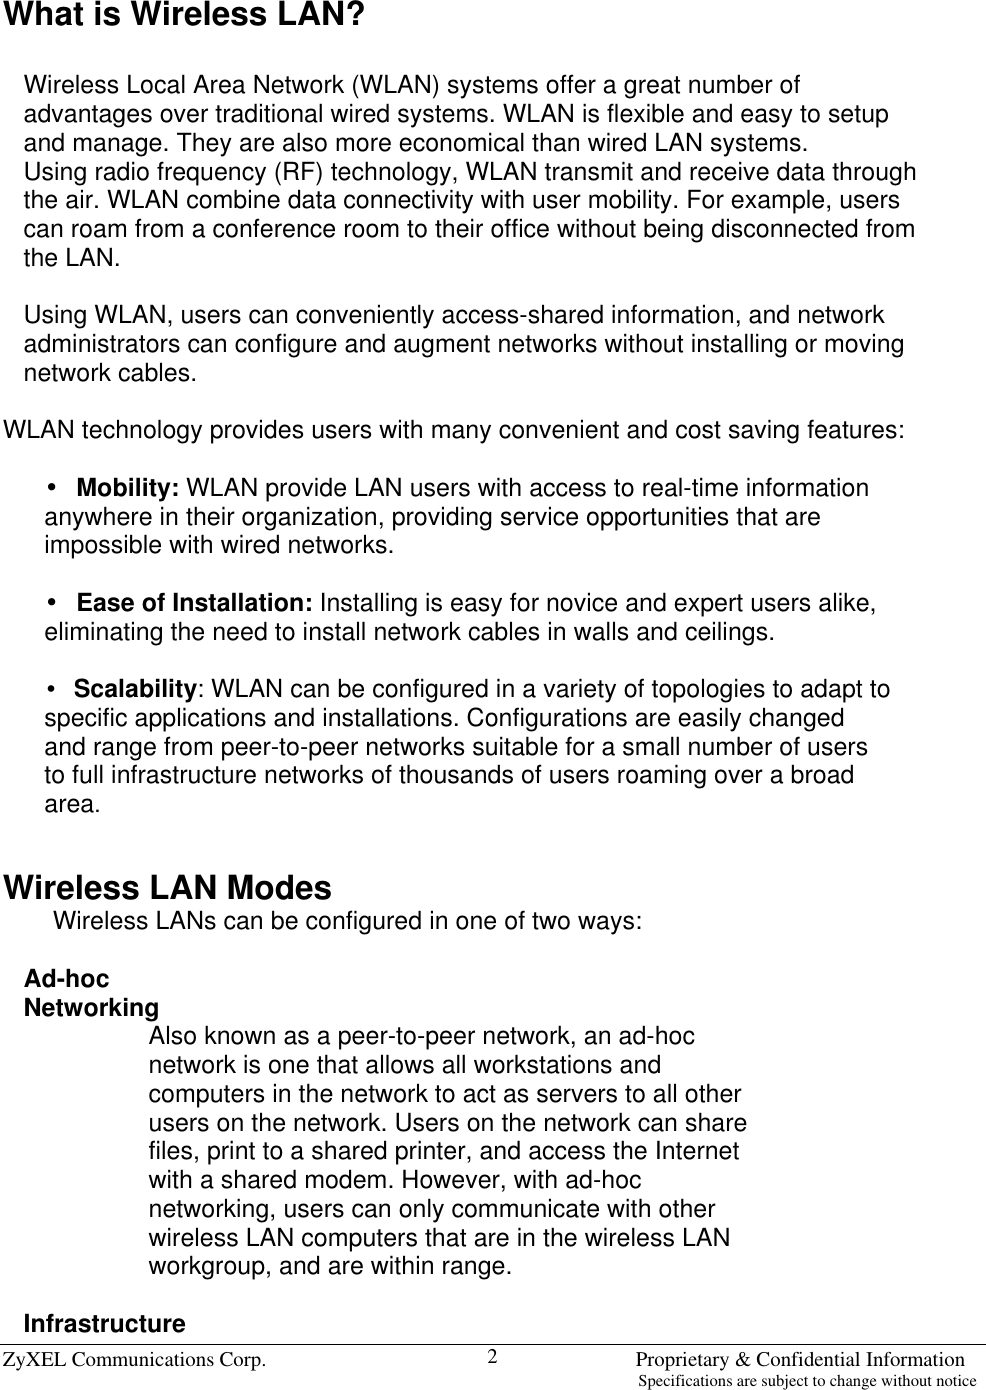  ZyXEL Communications Corp.                                                                       Proprietary &amp; Confidential Information                                                                                                                           Specifications are subject to change without notice 2 What is Wireless LAN?  Wireless Local Area Network (WLAN) systems offer a great number of advantages over traditional wired systems. WLAN is flexible and easy to setup and manage. They are also more economical than wired LAN systems. Using radio frequency (RF) technology, WLAN transmit and receive data through the air. WLAN combine data connectivity with user mobility. For example, users can roam from a conference room to their office without being disconnected from the LAN.  Using WLAN, users can conveniently access-shared information, and network administrators can configure and augment networks without installing or moving network cables.  WLAN technology provides users with many convenient and cost saving features:   •Mobility: WLAN provide LAN users with access to real-time information anywhere in their organization, providing service opportunities that are impossible with wired networks.   •Ease of Installation: Installing is easy for novice and expert users alike, eliminating the need to install network cables in walls and ceilings.   •Scalability: WLAN can be configured in a variety of topologies to adapt to specific applications and installations. Configurations are easily changed and range from peer-to-peer networks suitable for a small number of users to full infrastructure networks of thousands of users roaming over a broad area.   Wireless LAN Modes Wireless LANs can be configured in one of two ways:  Ad-hoc Networking Also known as a peer-to-peer network, an ad-hoc network is one that allows all workstations and computers in the network to act as servers to all other users on the network. Users on the network can share files, print to a shared printer, and access the Internet with a shared modem. However, with ad-hoc networking, users can only communicate with other wireless LAN computers that are in the wireless LAN workgroup, and are within range.  Infrastructure 